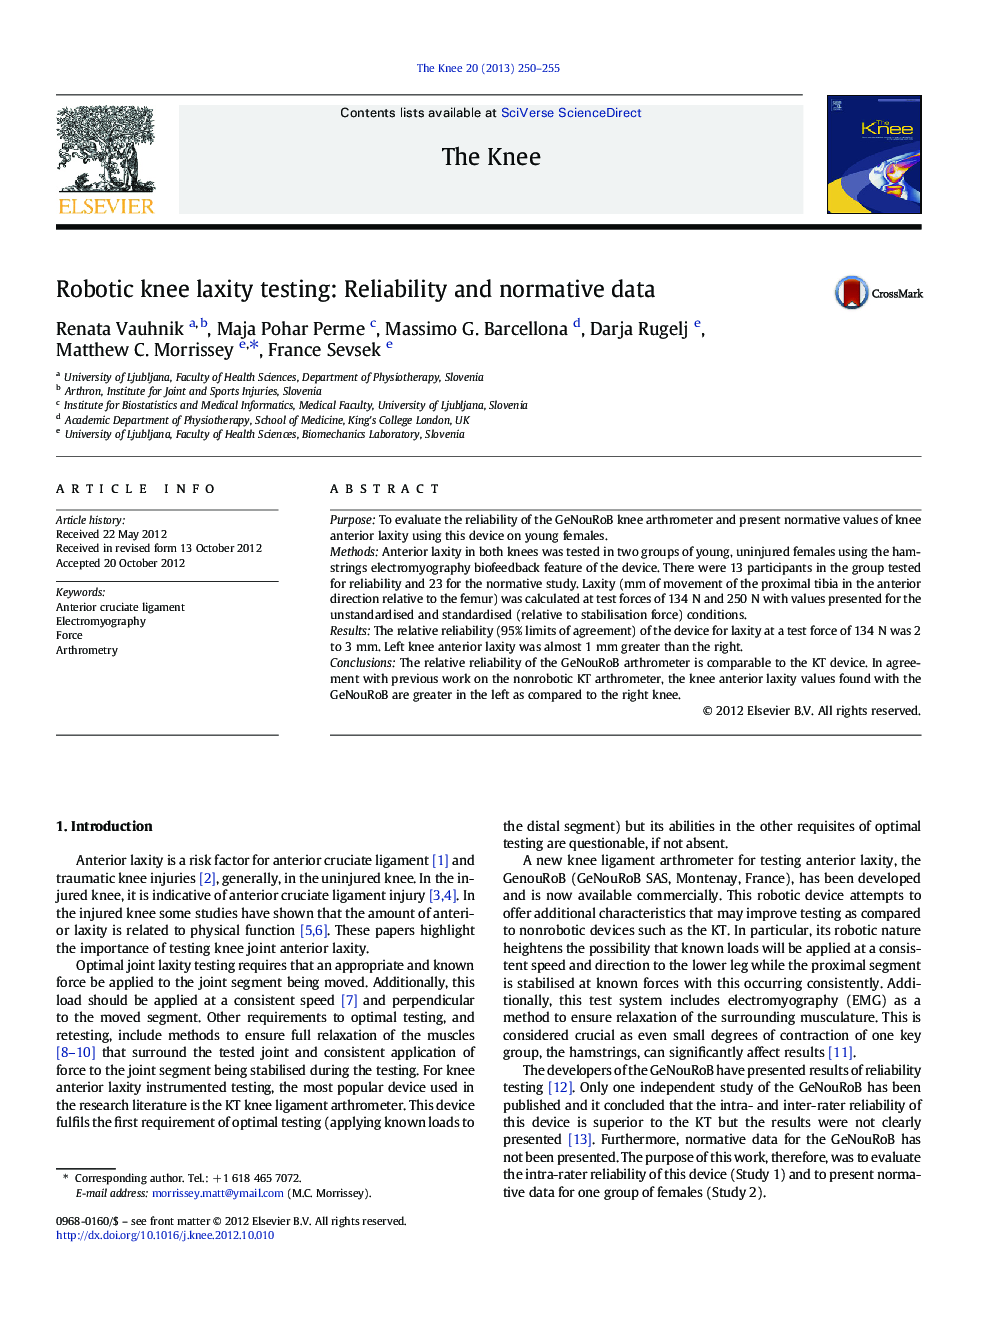 Robotic knee laxity testing: Reliability and normative data